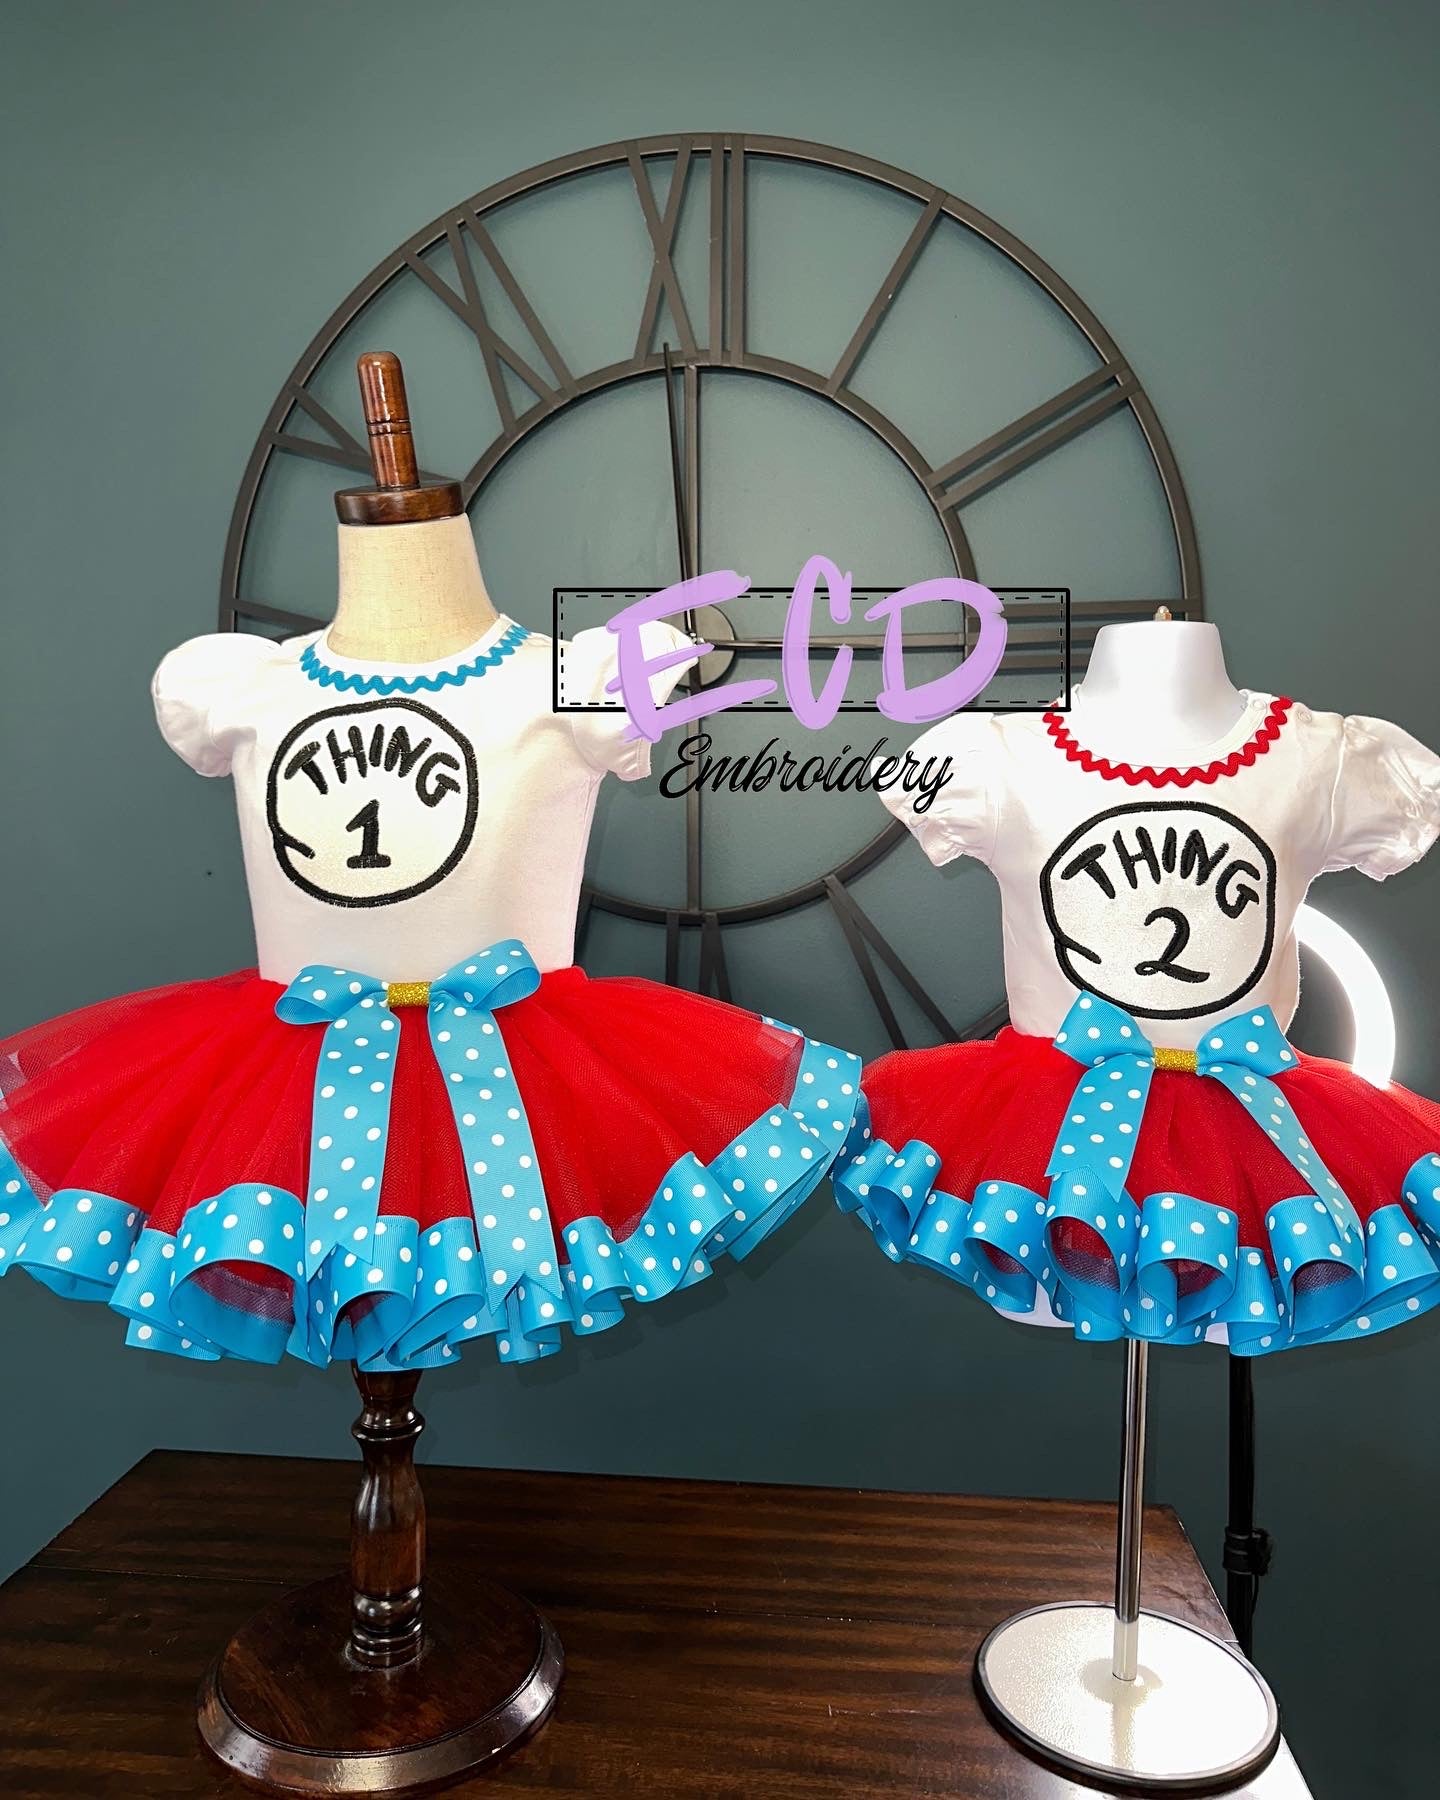 Thing 1 and thing 2 theme birthday outfit for girls. Embroidered on white puff sleeved cotton shirt